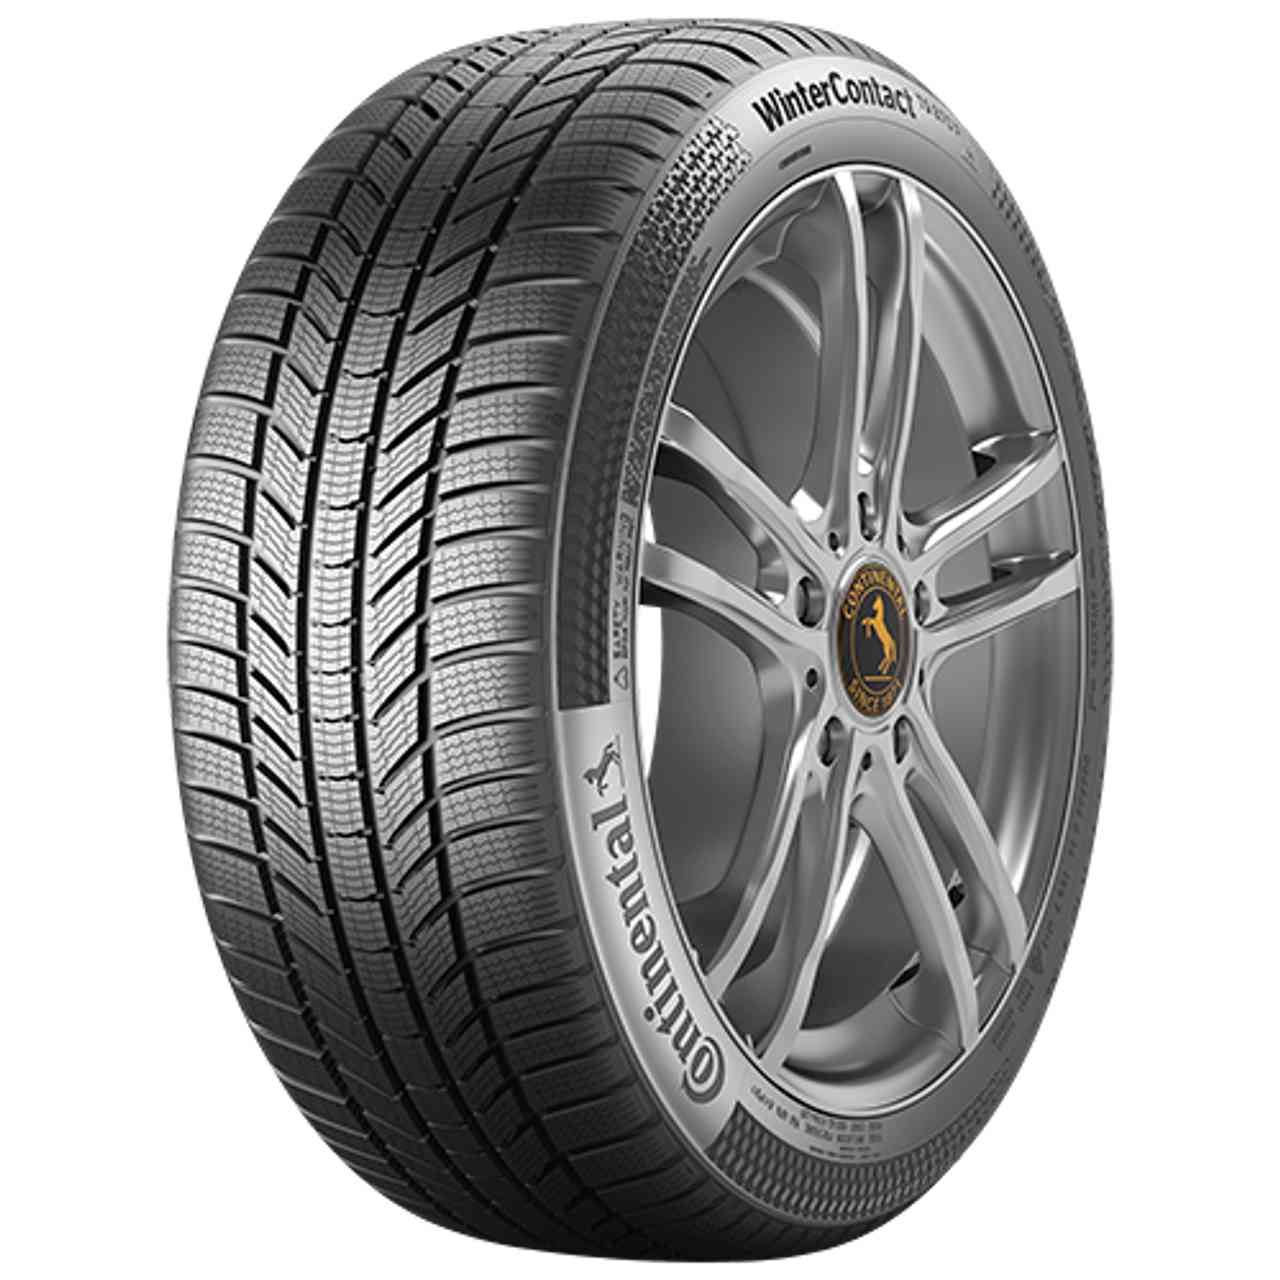 CONTINENTAL WINTERCONTACT TS 870 P (EVc) 235/45R21 101T FR BSW von Continental